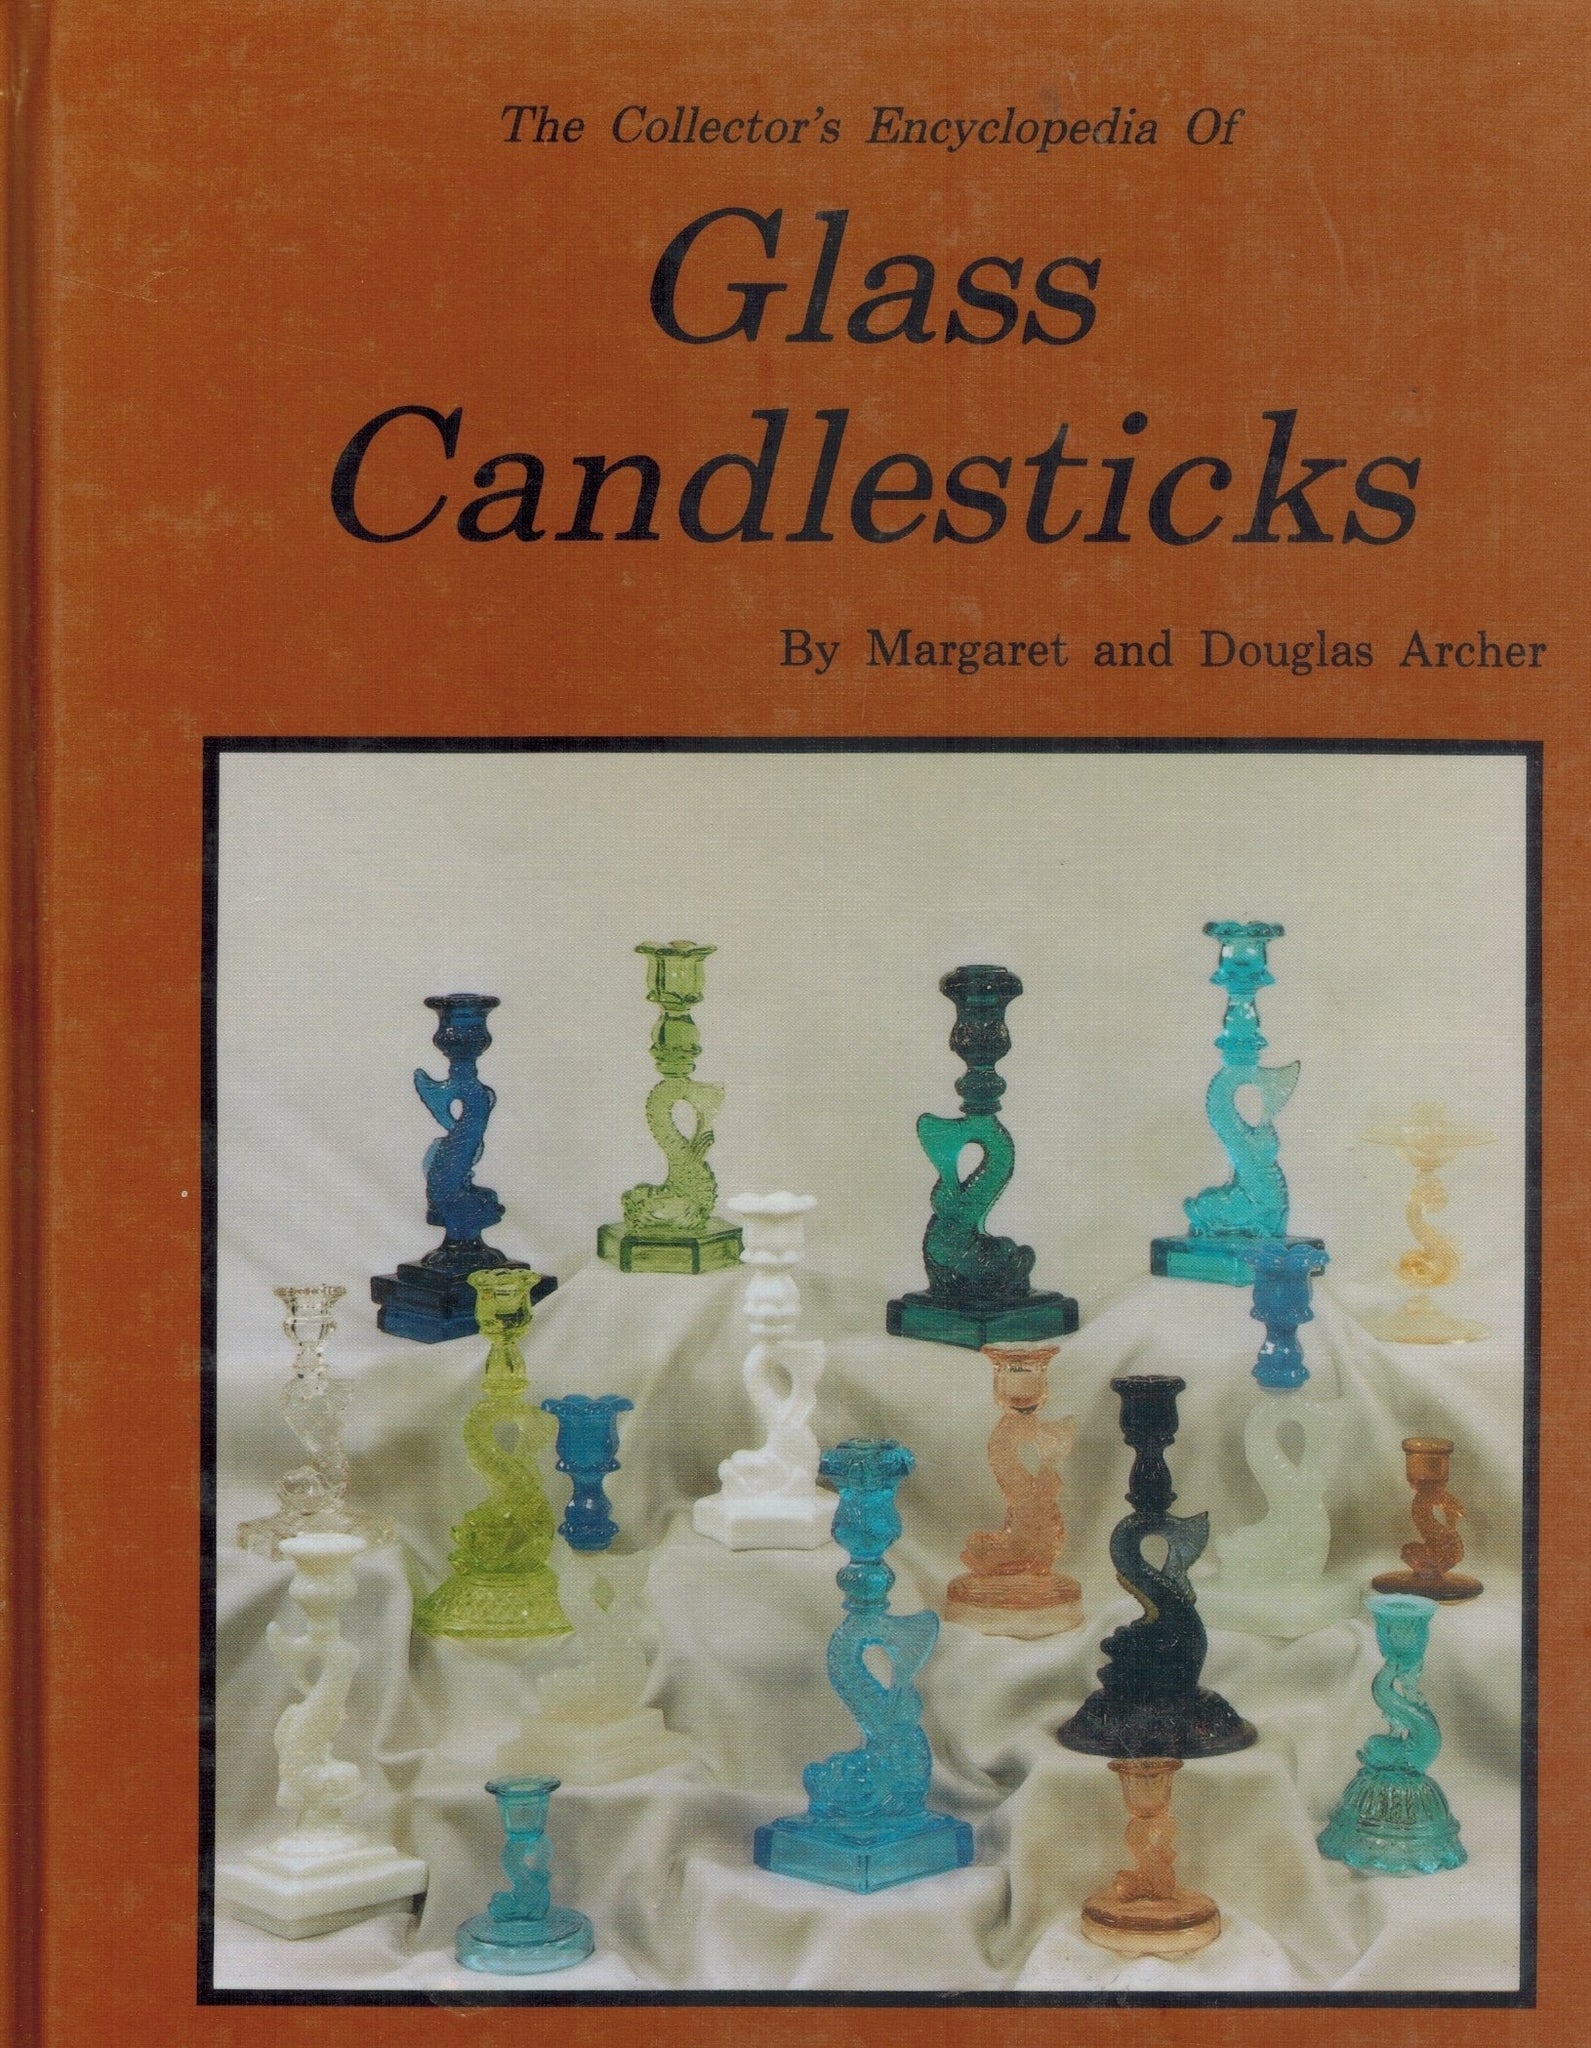 The Collector's Encyclopedia of Glass Candlesticks